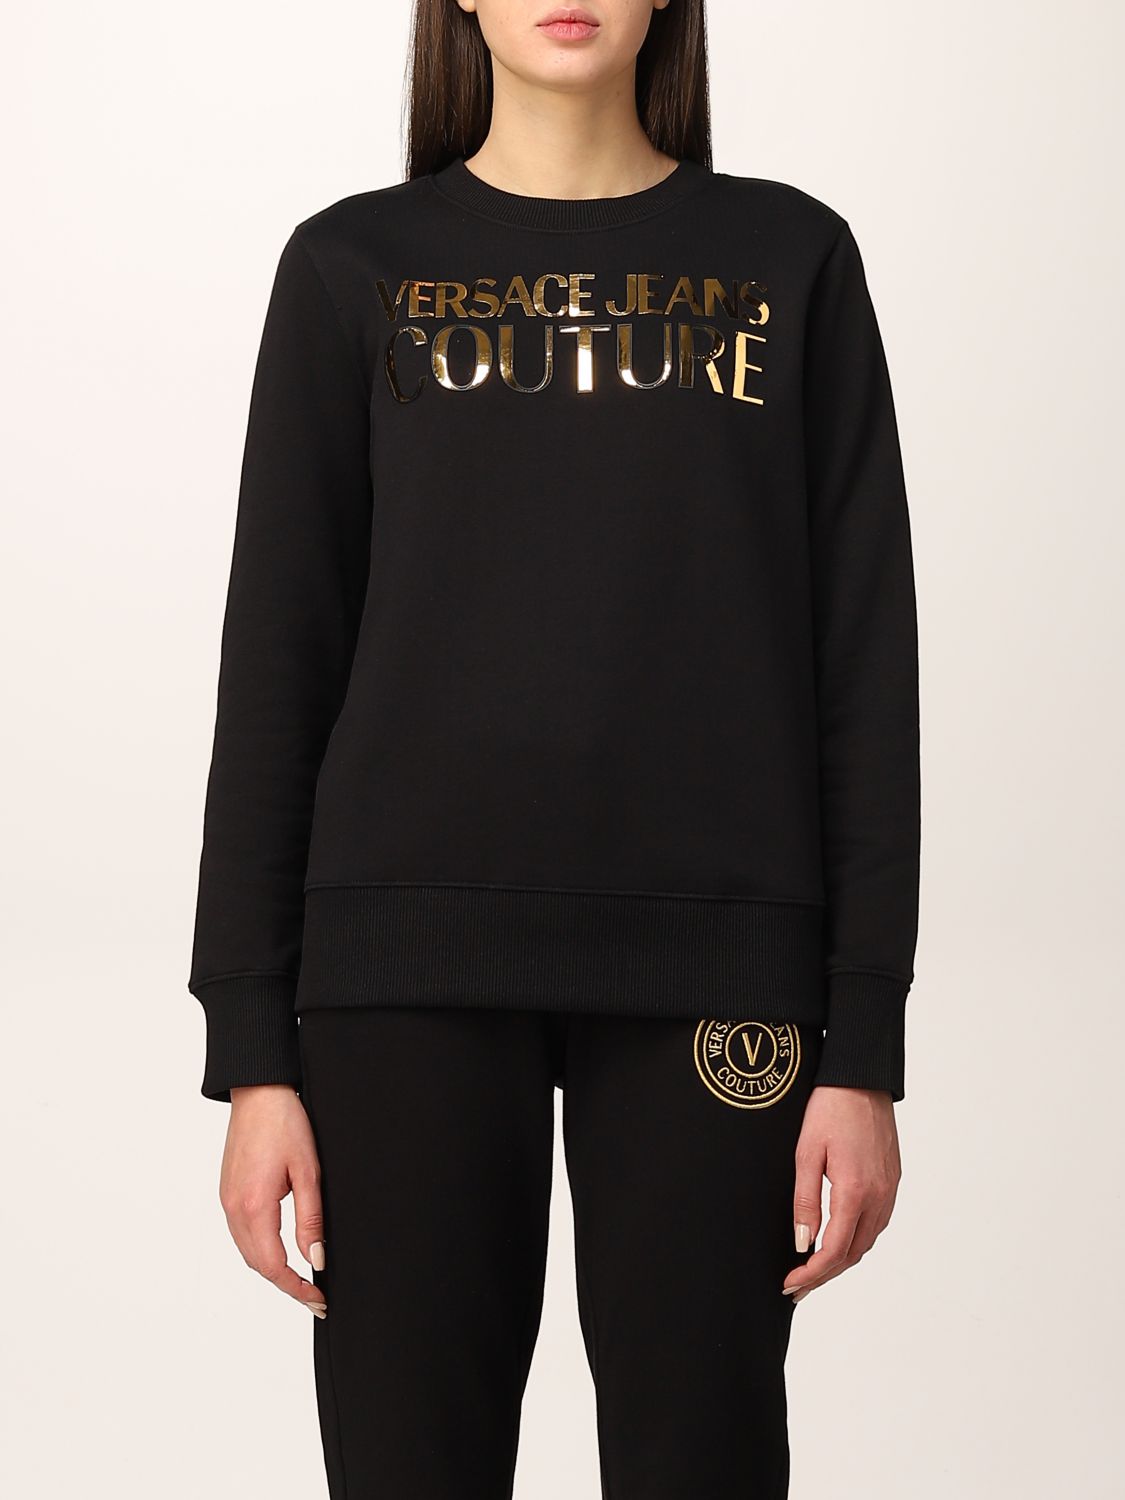 VERSACE JEANS COUTURE: sweatshirt with logo - Black 1 | Versace Jeans ...